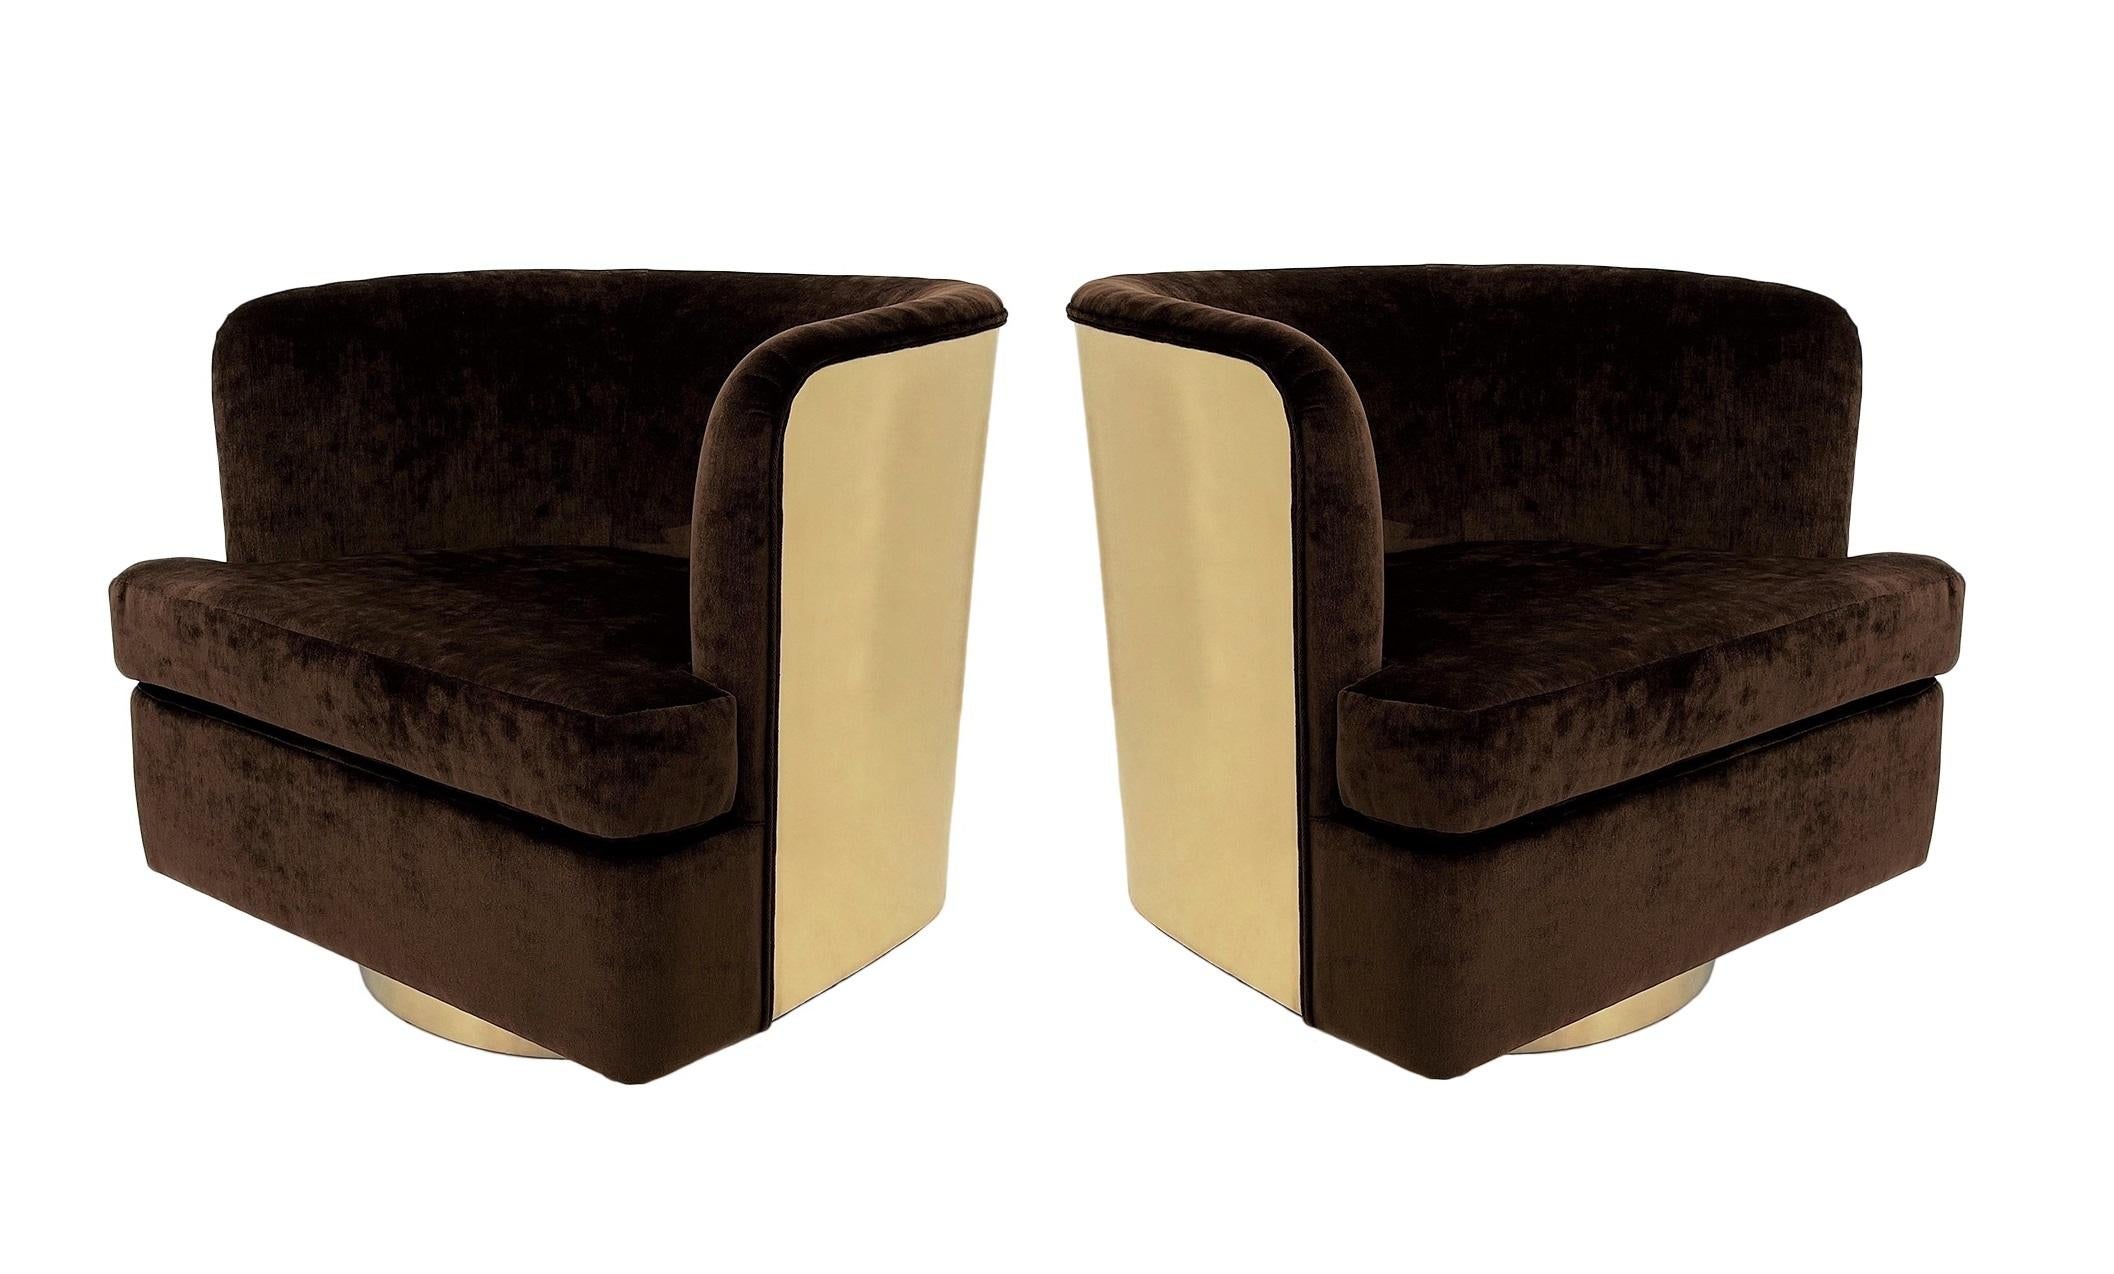 This stunning pair of heirloom quality barrel chairs by Milo Baughman for Thayer Coggin. Super high style, swivel chairs recovered in luxurious brown velvet that contrasts beautifully against the gleaming mirror-finish brass backs and bases. The